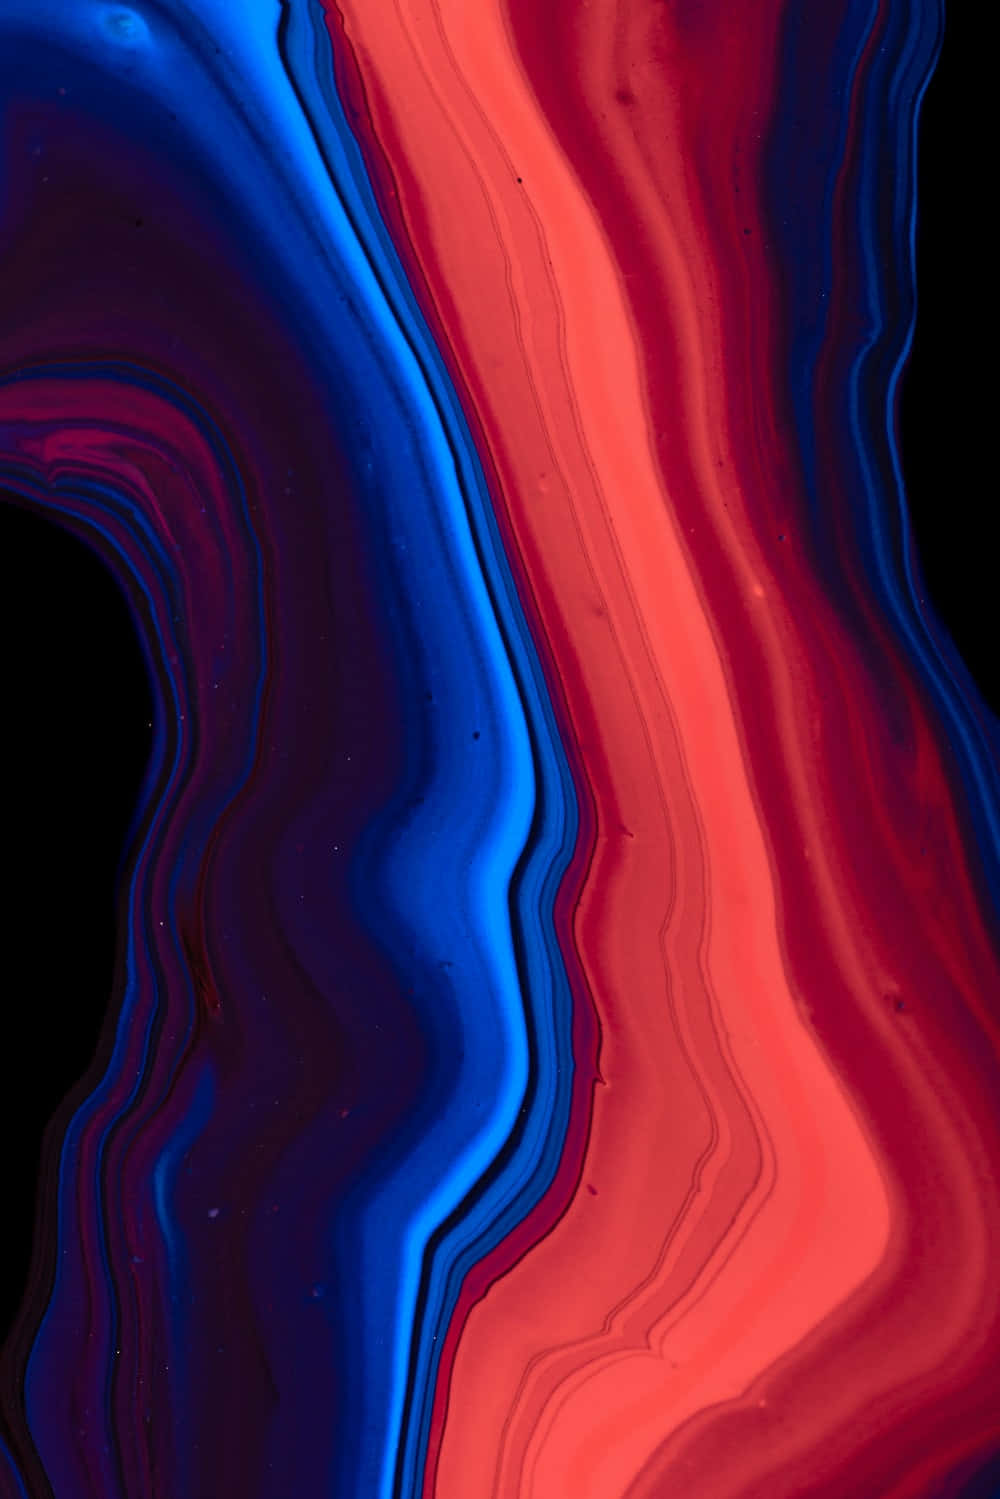 A Blue And Red Abstract Painting On A Black Background Wallpaper